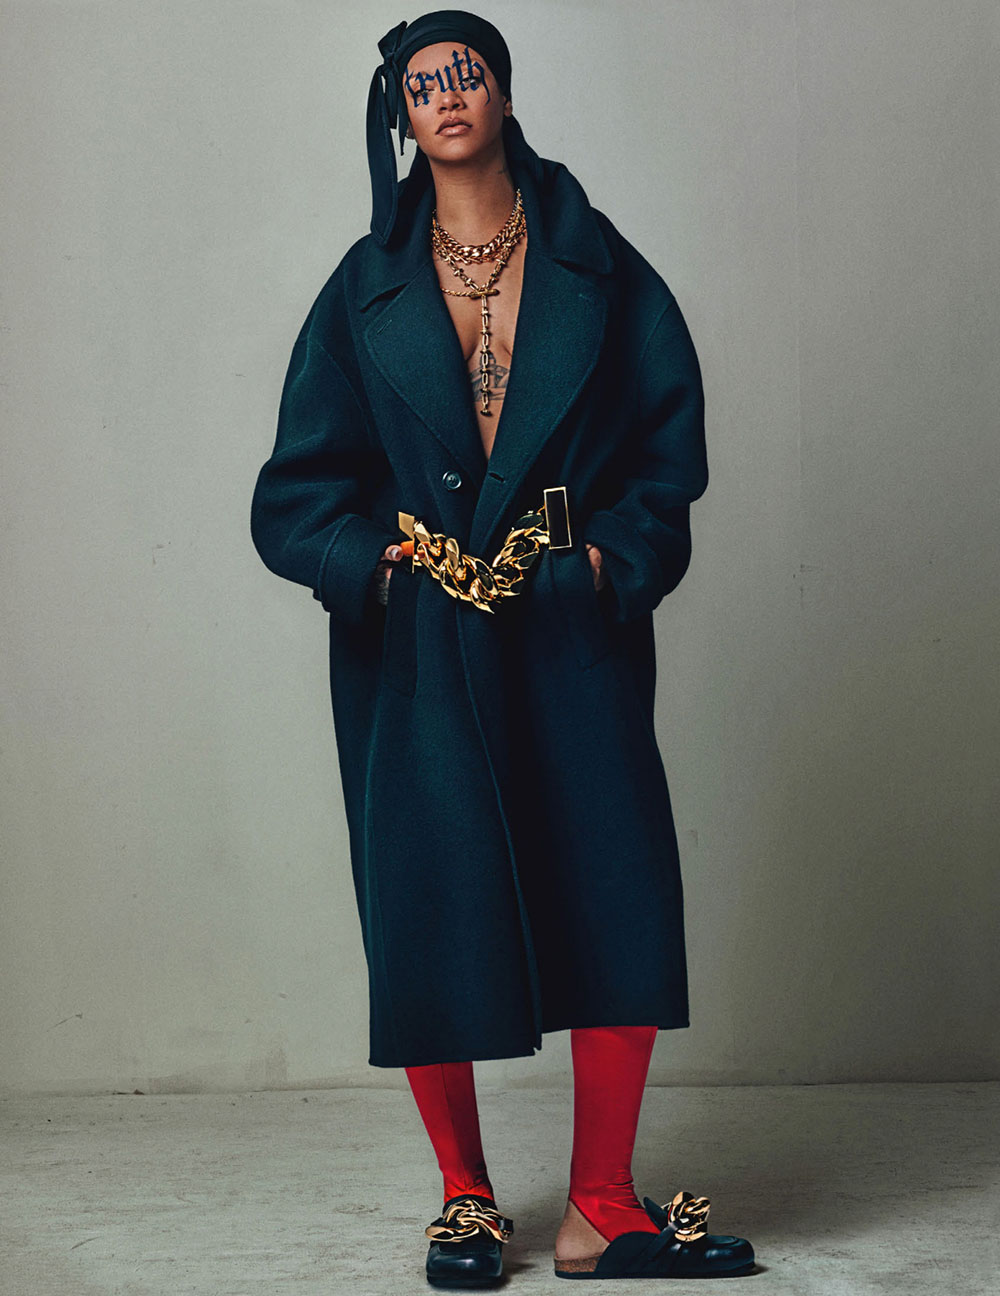 Rihanna covers British Vogue May 2020 by Steven Klein